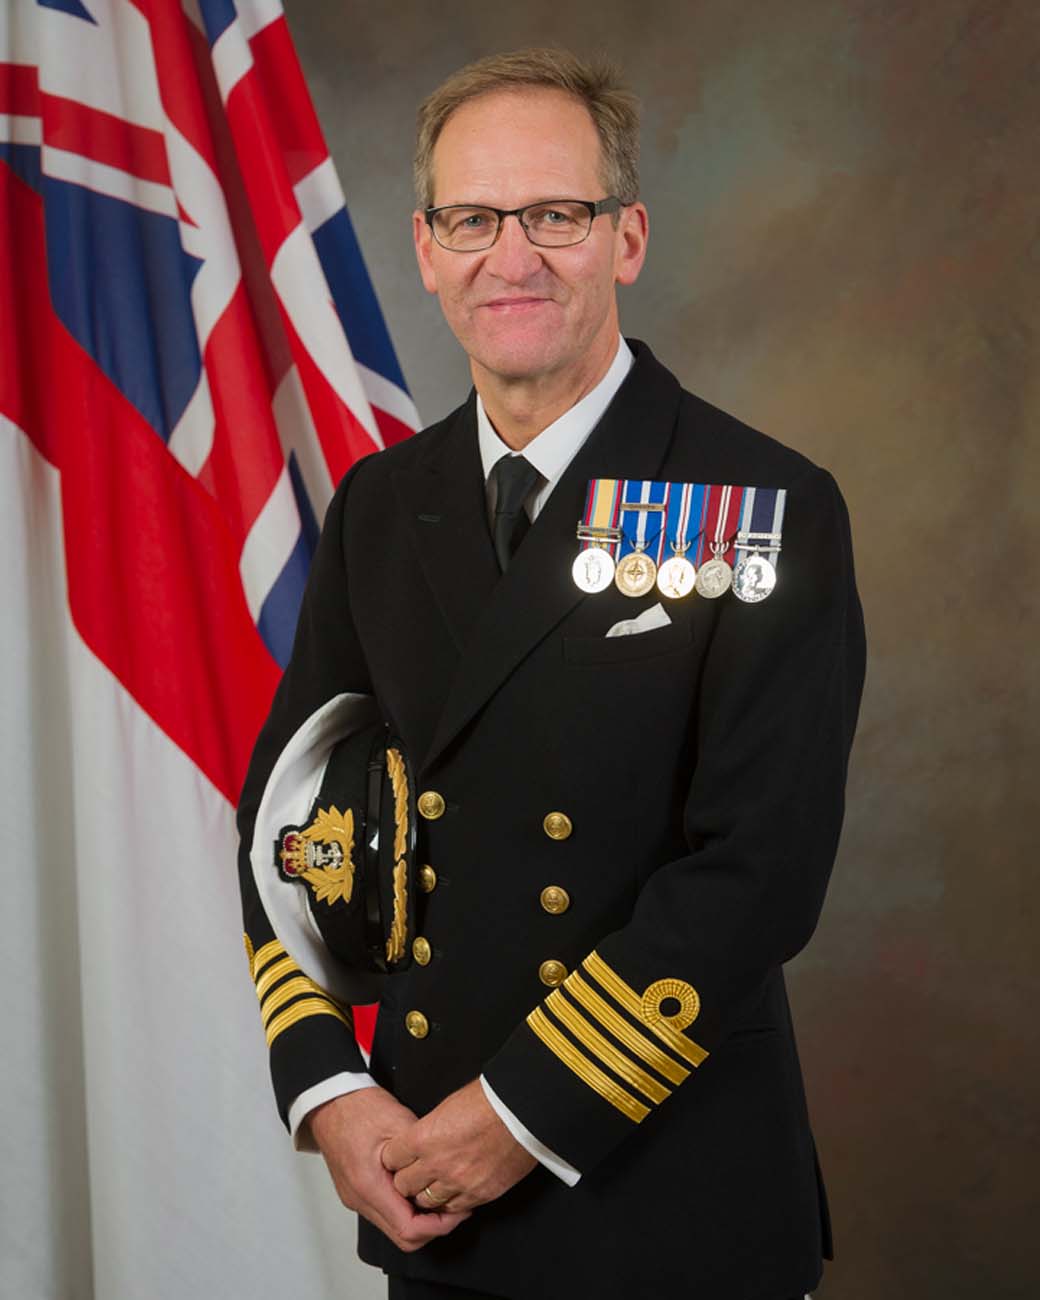 HMS Collingwood welcomes new Commanding Officer | Royal Navy